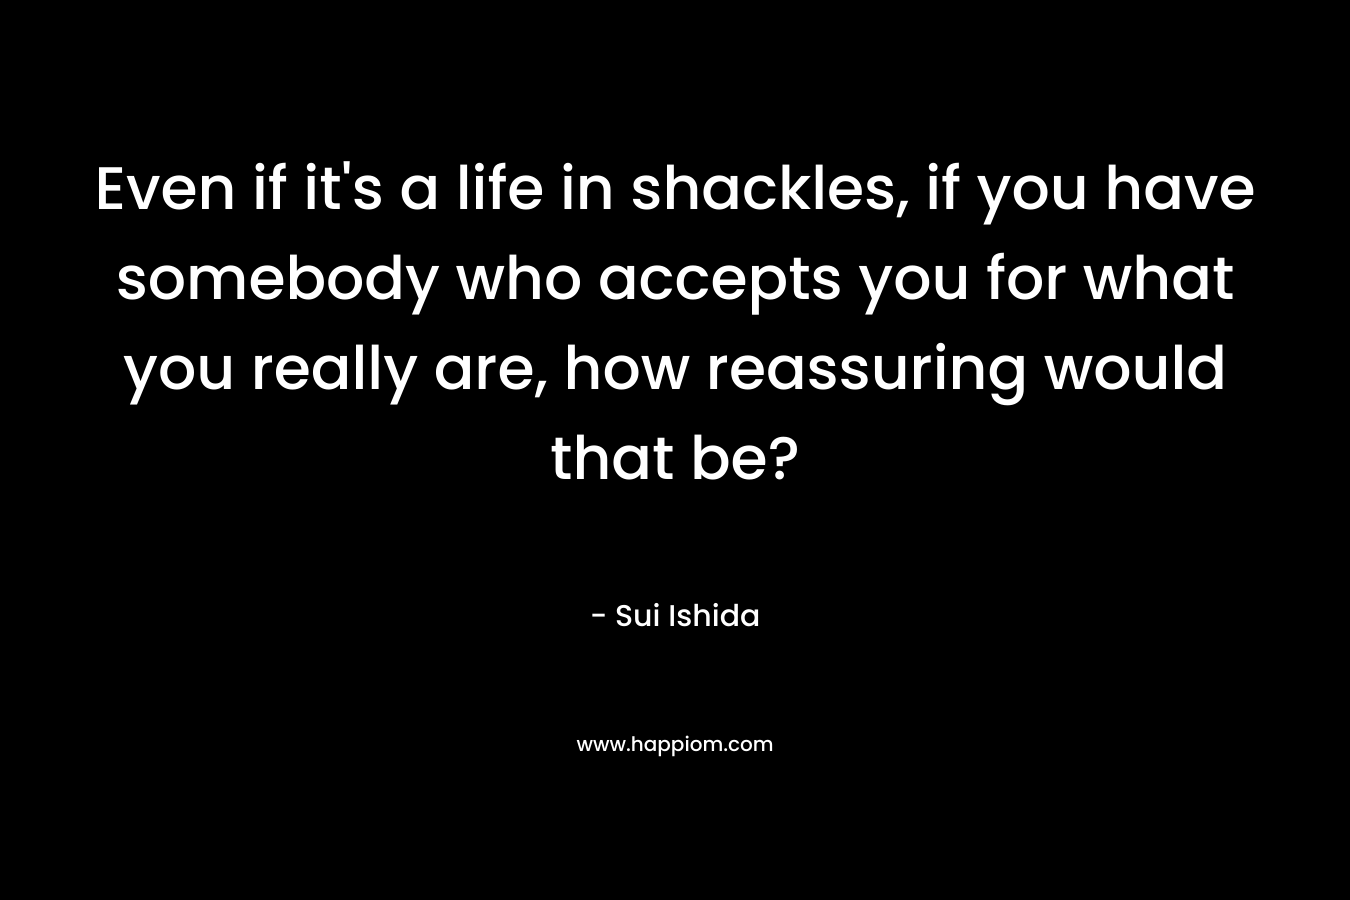 Even if it’s a life in shackles, if you have somebody who accepts you for what you really are, how reassuring would that be? – Sui Ishida